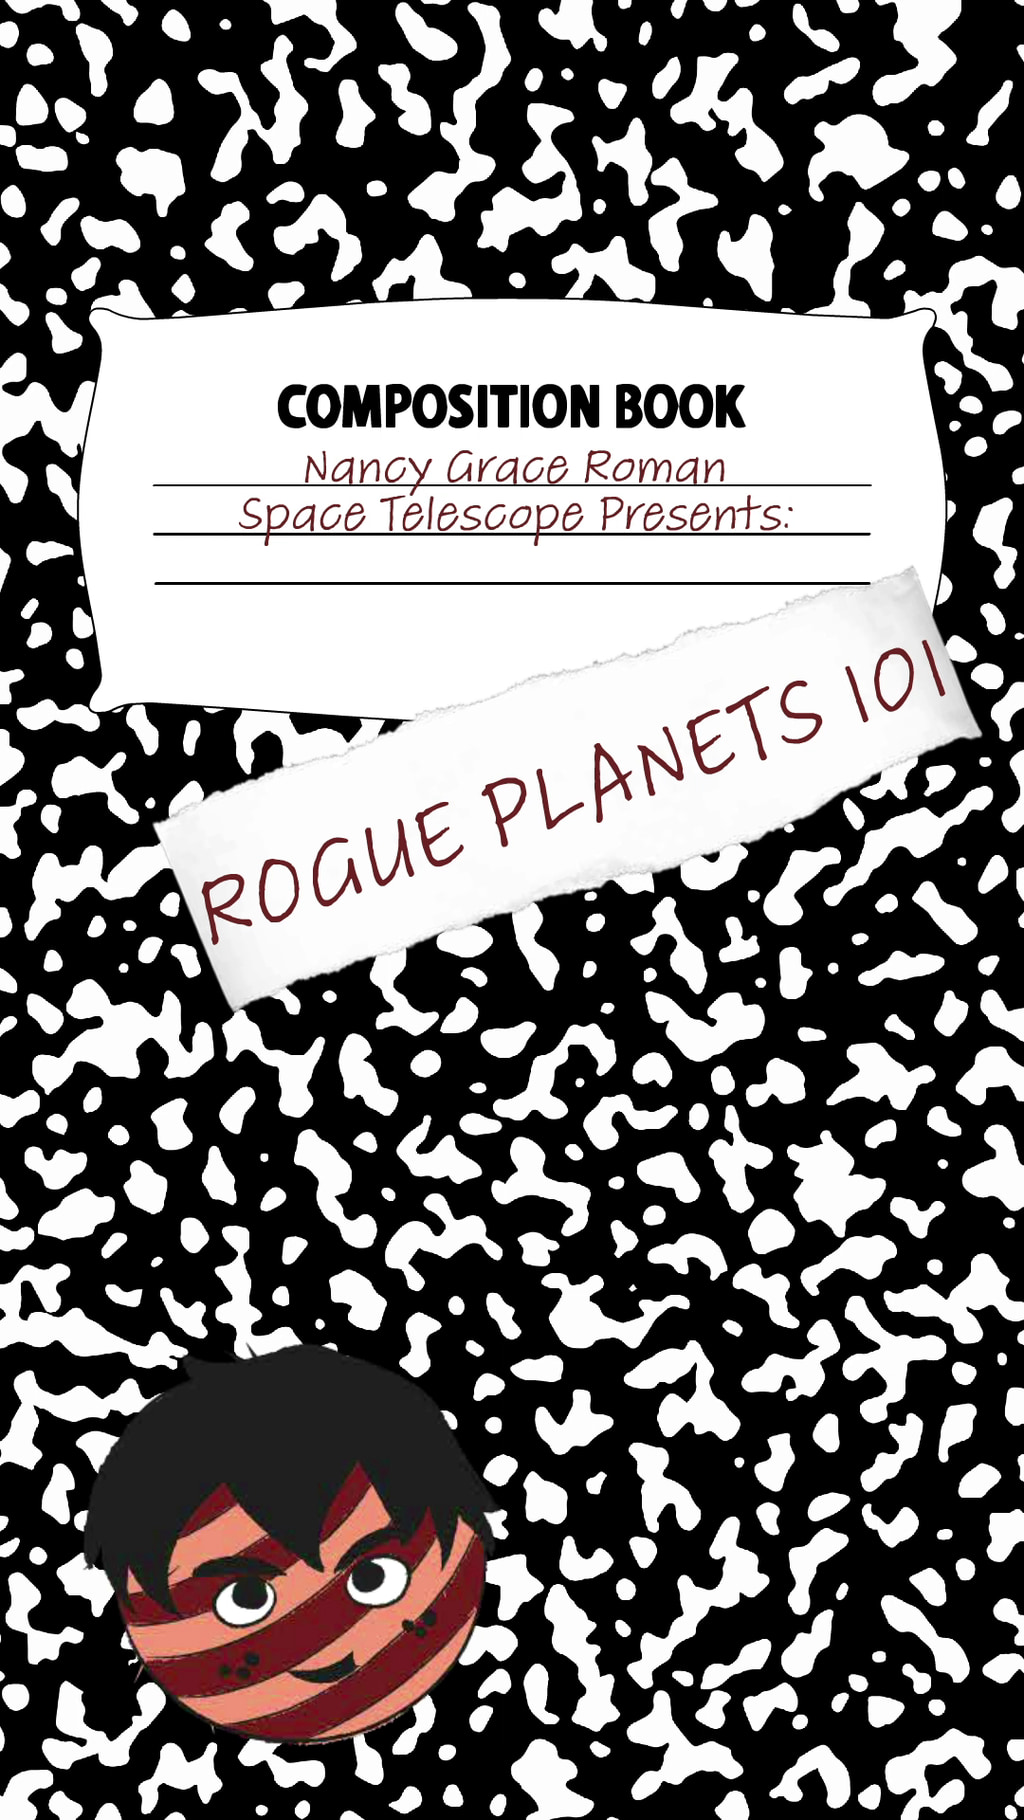 Preview Image for Rogue Planet 101 Instagram story